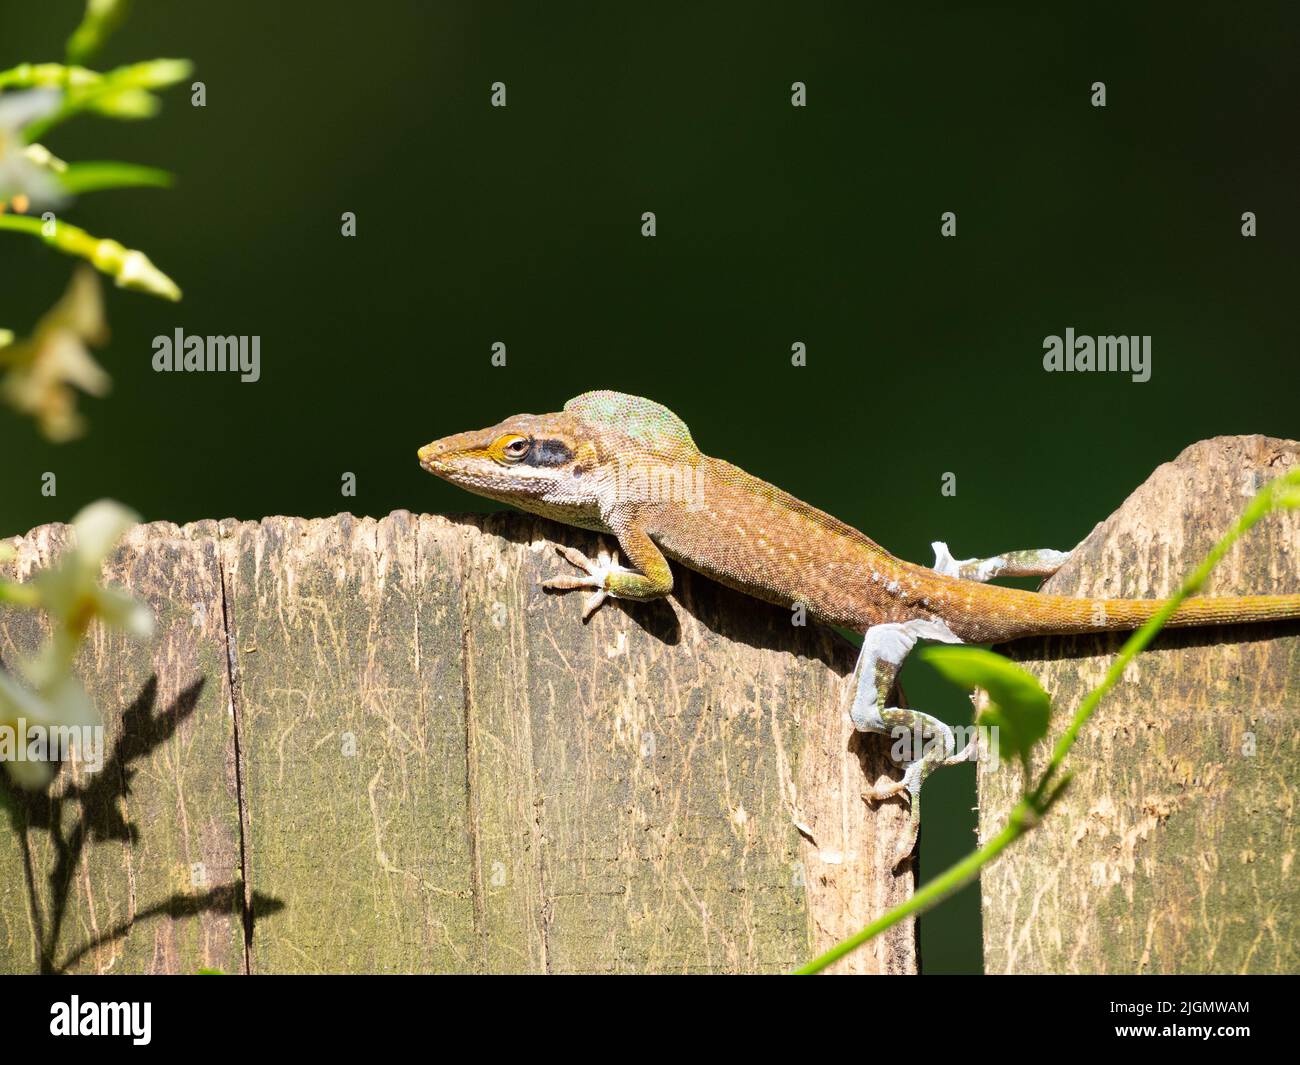 Moulting Green Anole that has a reddish brown color, resting on top of a wooden fence board. Stock Photo